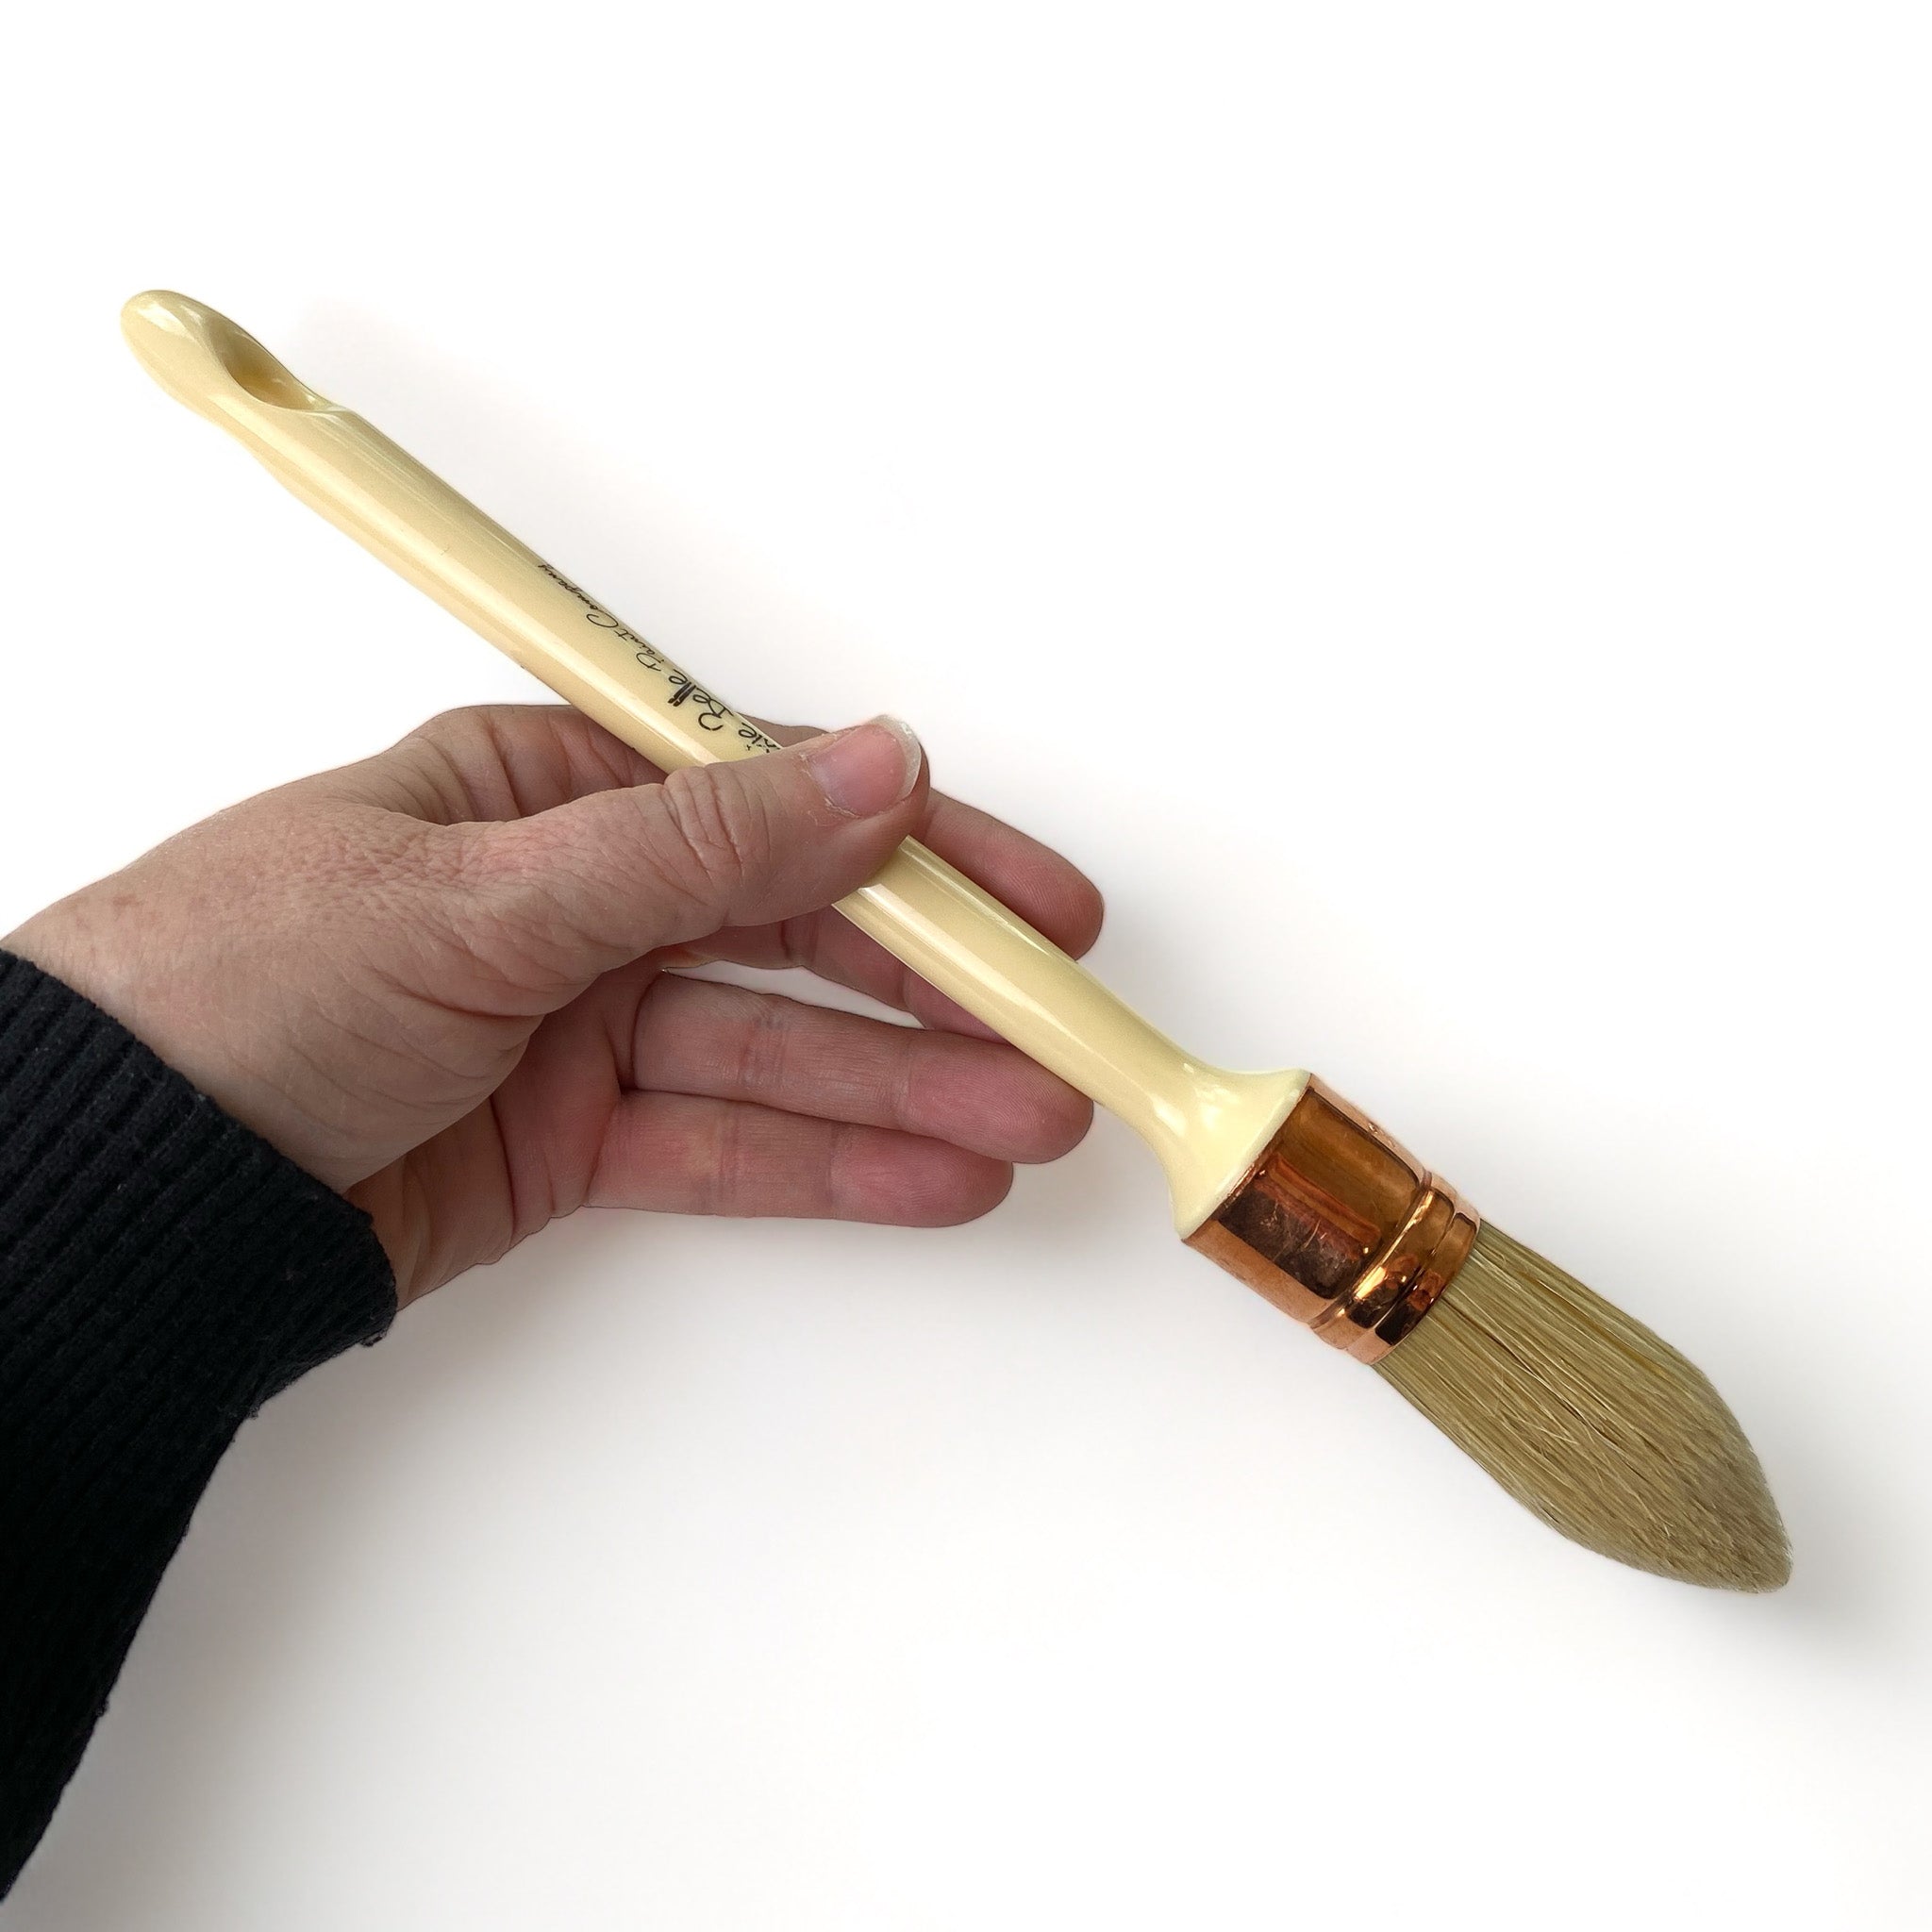 A hand is shown holding Dixie Belle's French Tip Paint Brush is against a white background. This brush has natural bristles and is shaped to help reach the fine-detailed areas on your furniture projects.